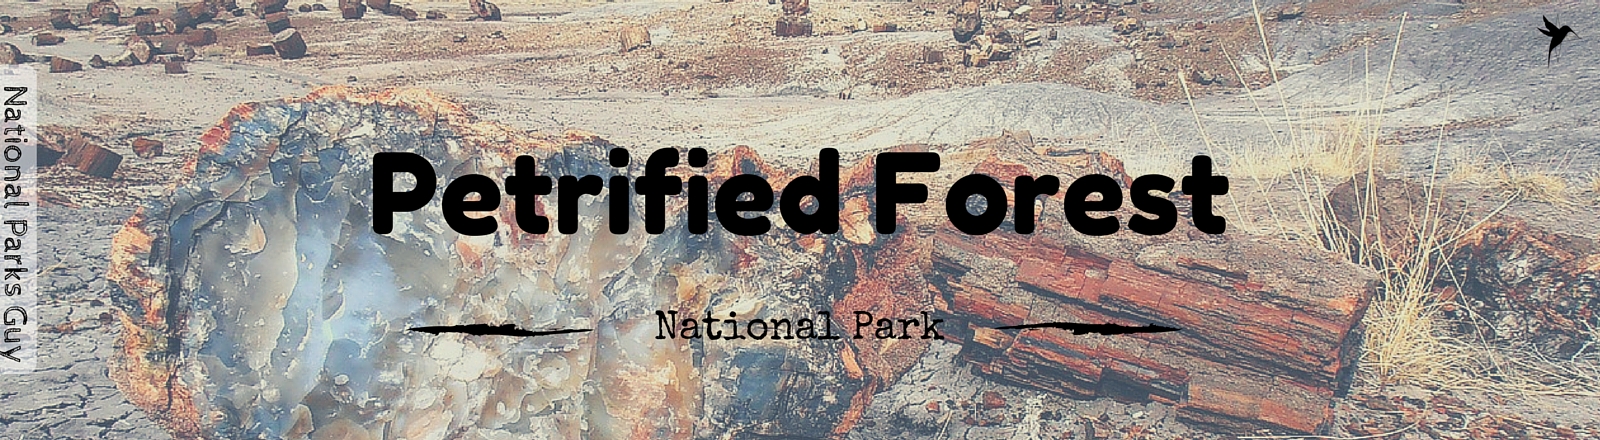 Petrified Forest National Park, USA, National Parks Guy, Stories, Tales, Adventures, Wildlife